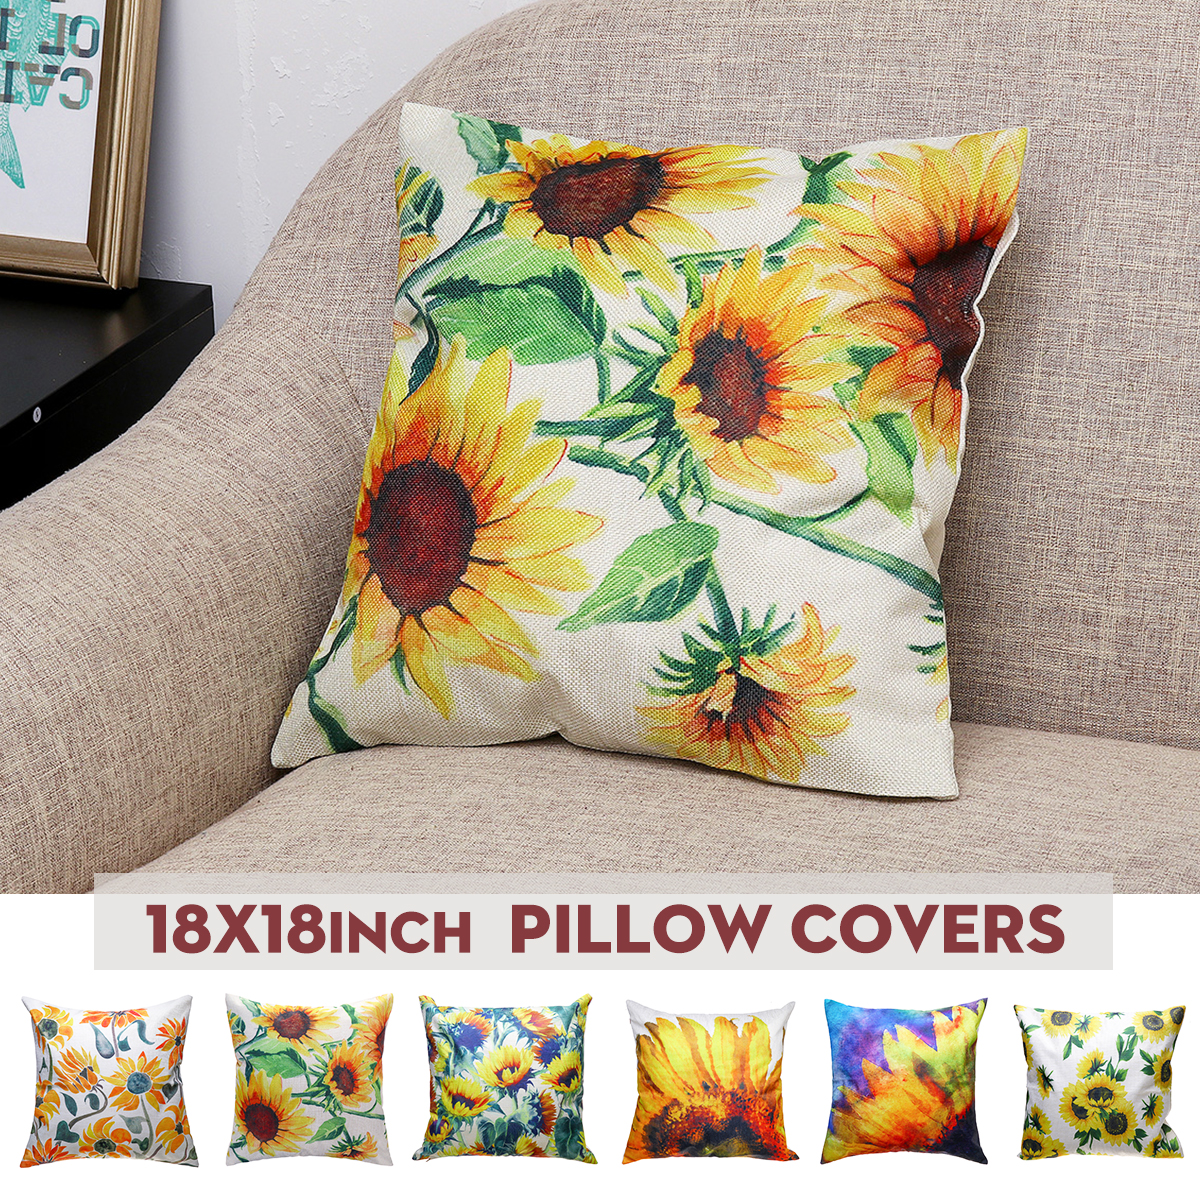 18x18inch-Square-Linen-Sunflowers-Cushion-Pillow-Case-Protective-Cover-1829530-1